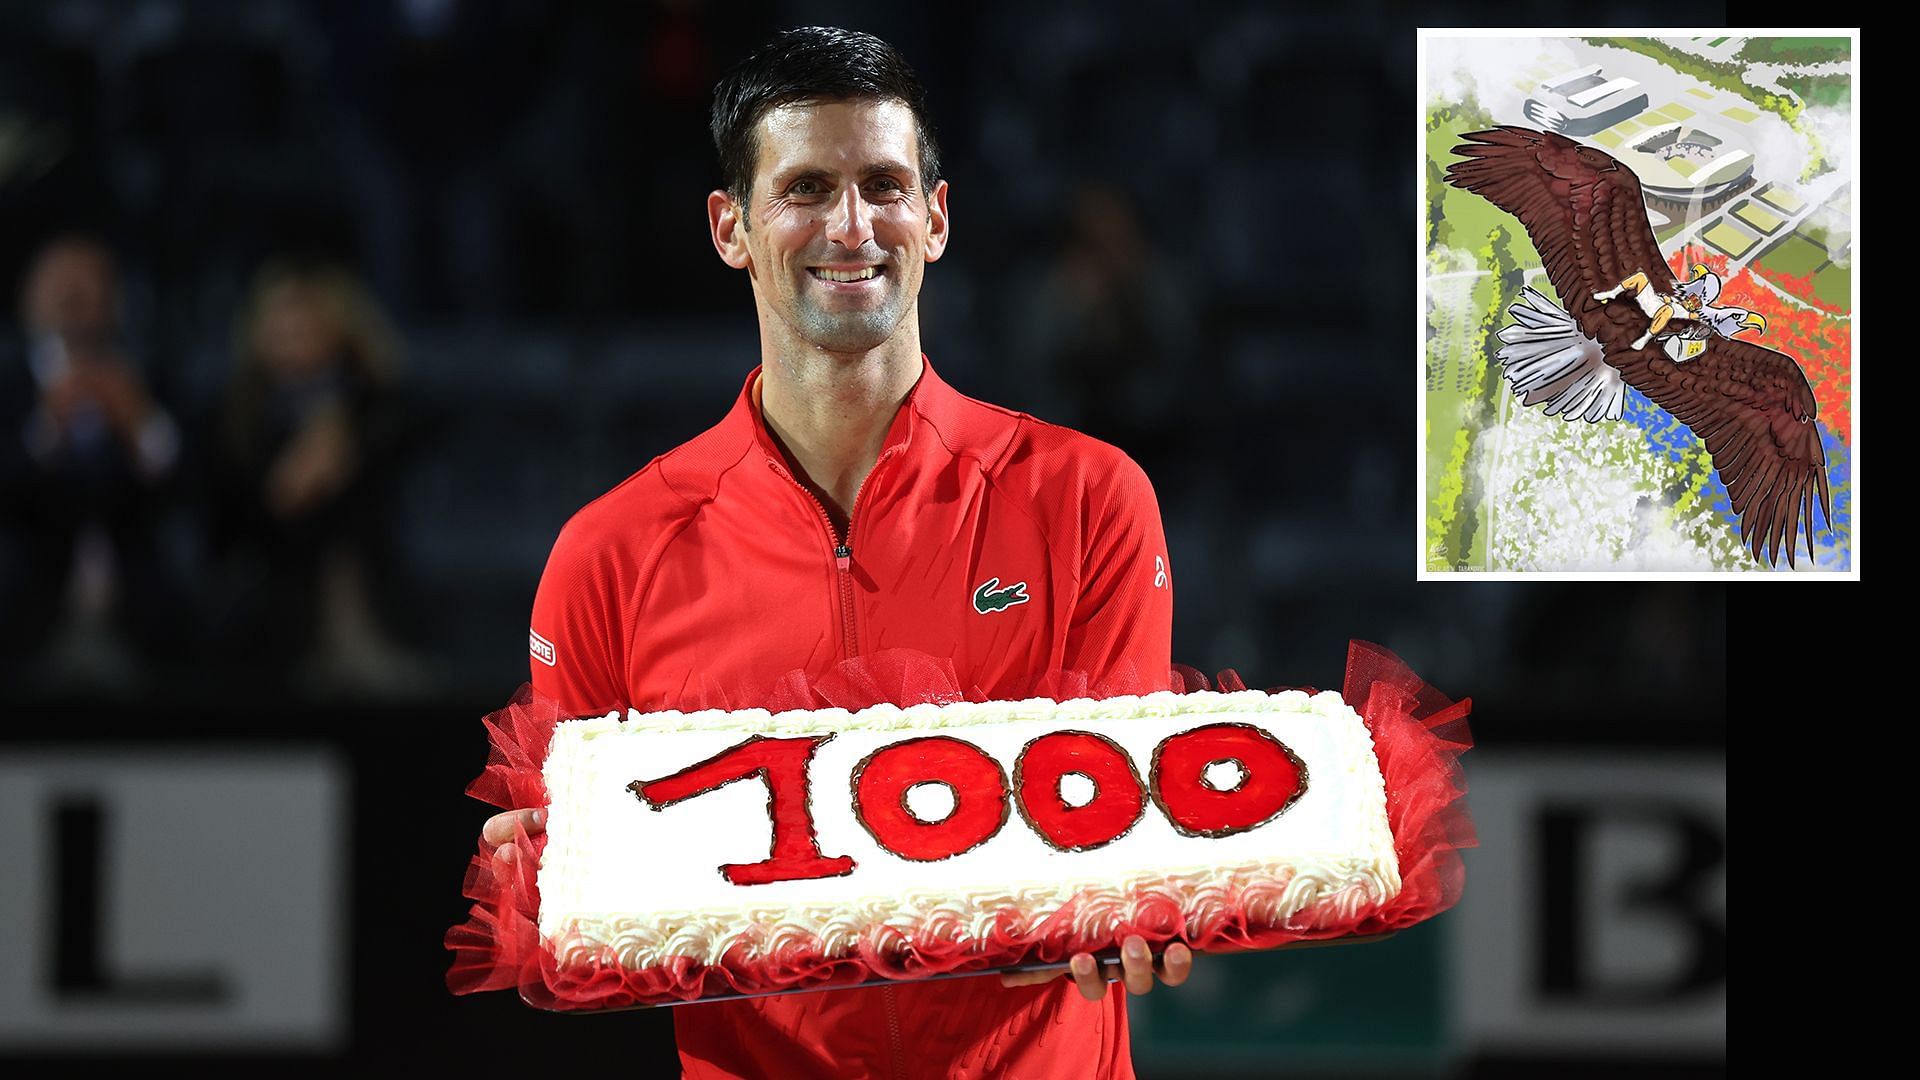 Novak Djokovic on his 1000th ATP match win and (inset) artwork by Aladin Tabakovic